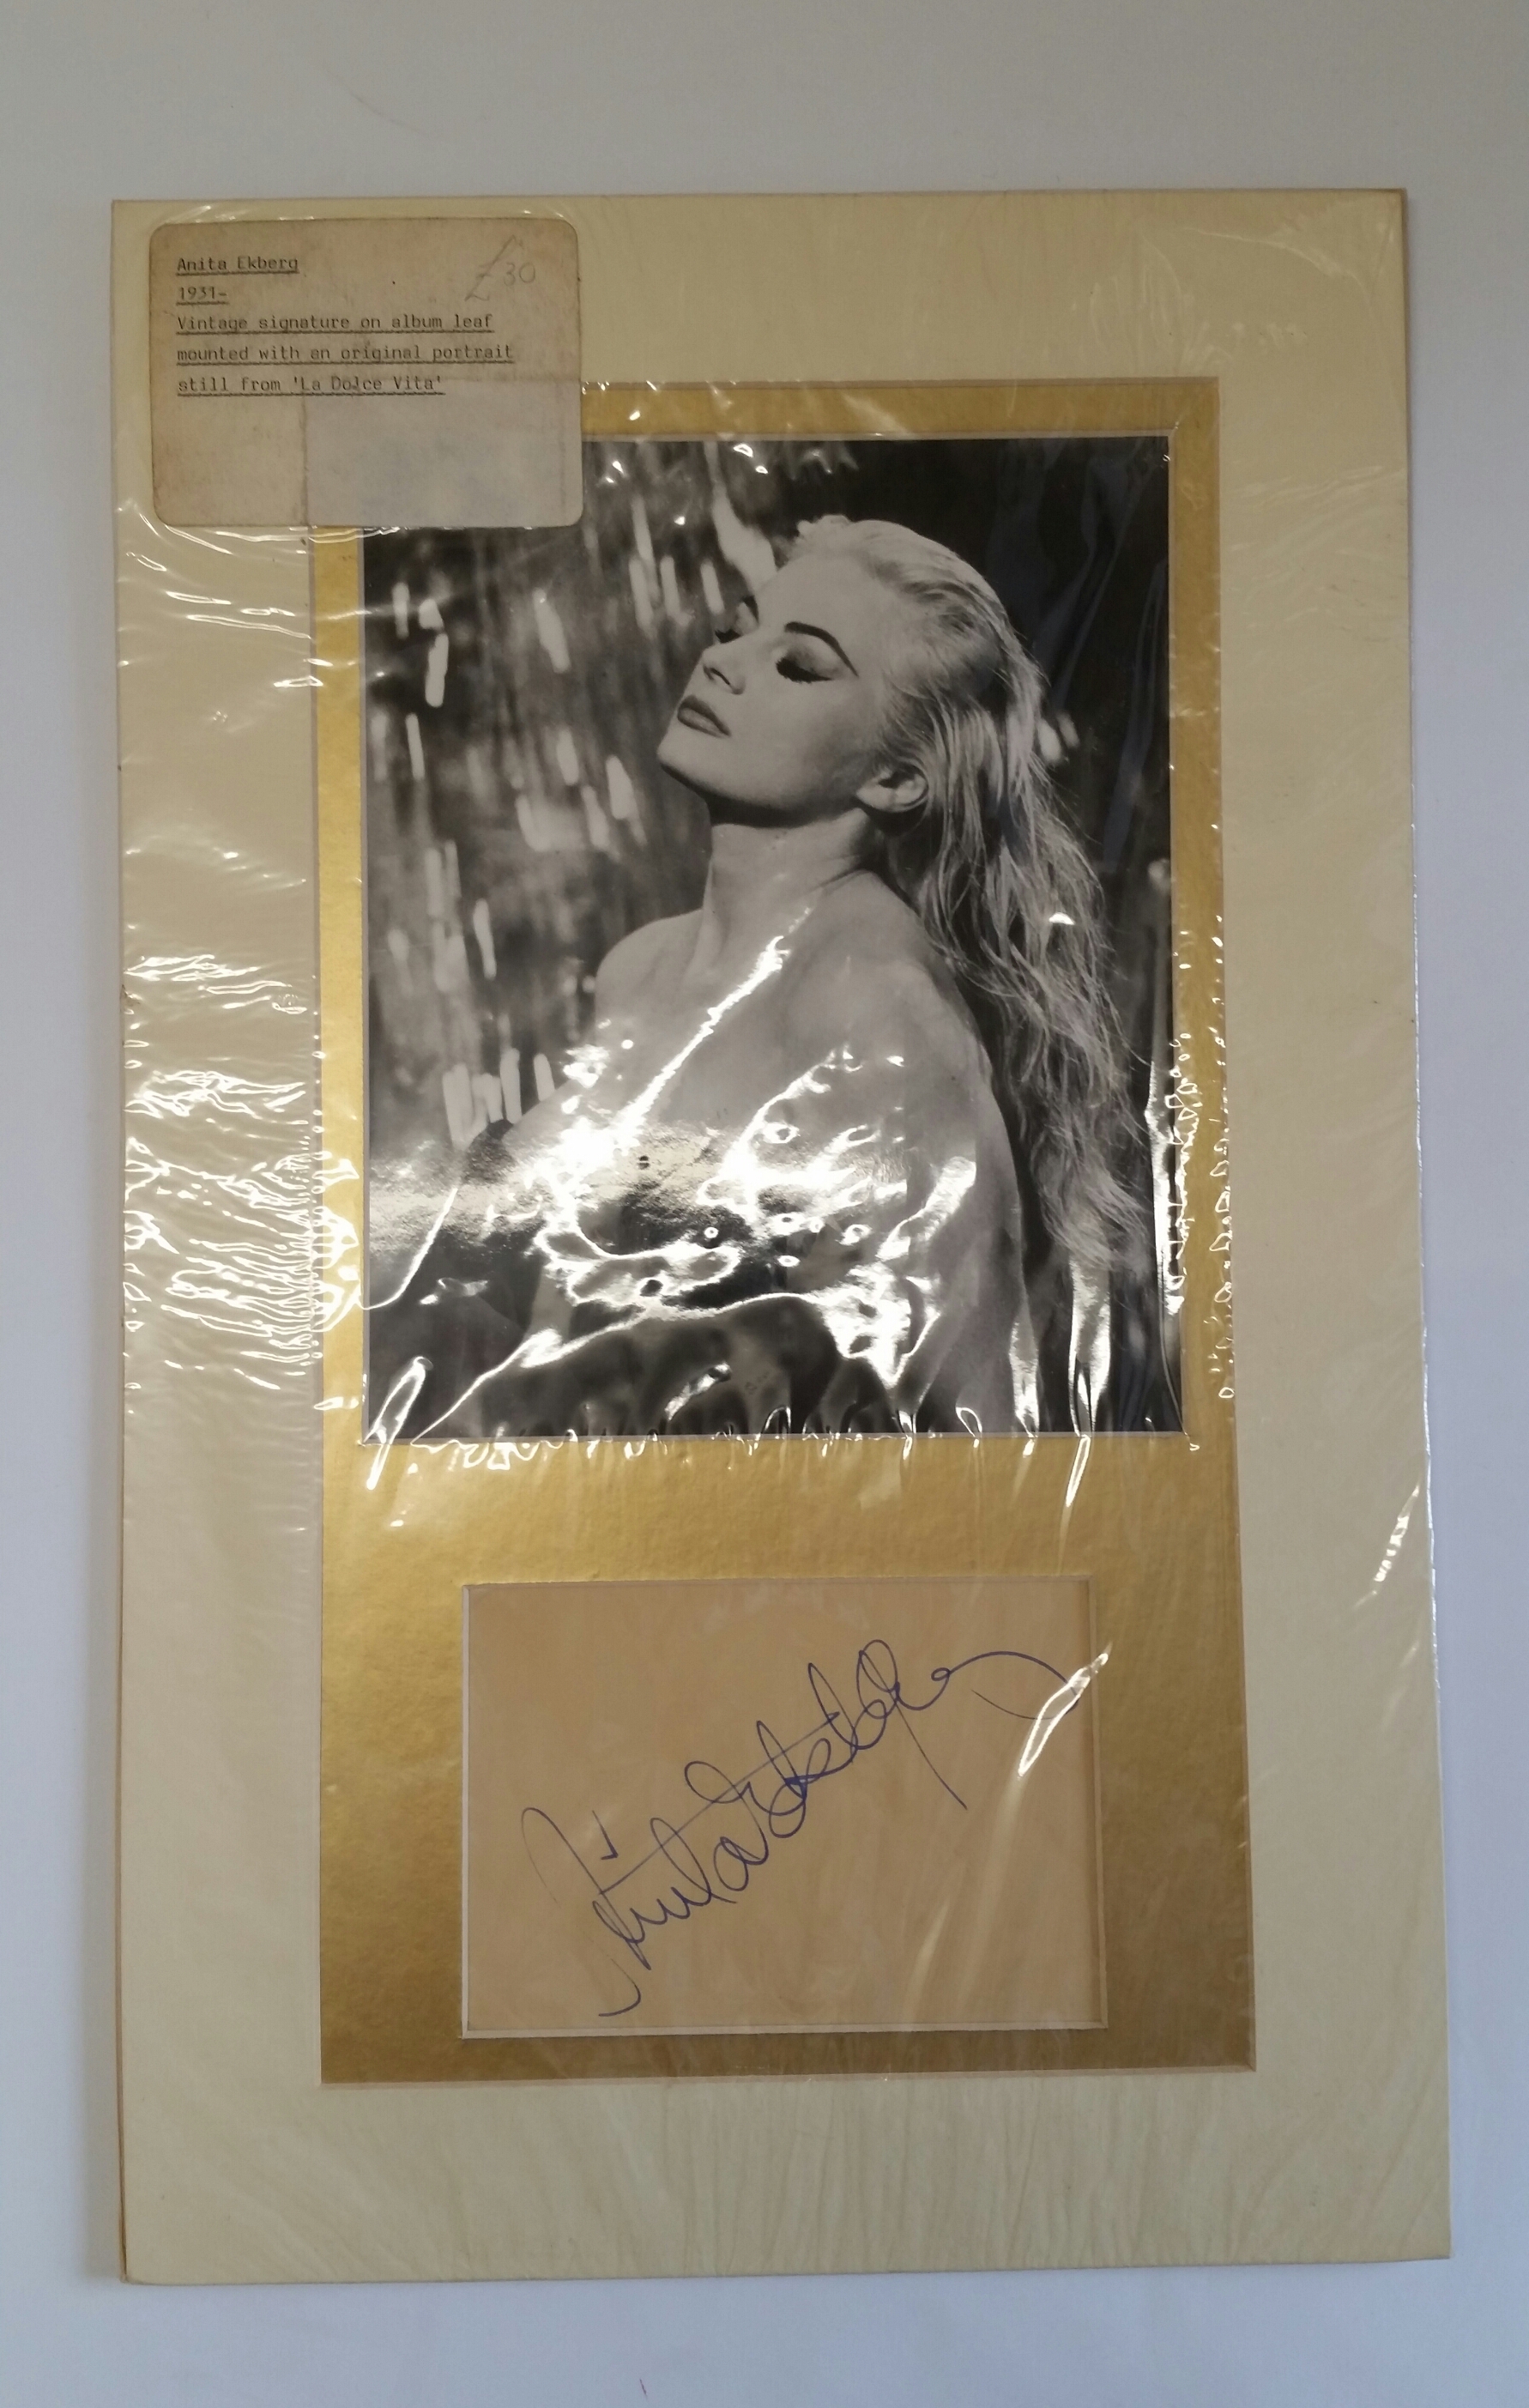 CINEMA, signed album page by Anita Ekberg, overmounted beneath photo, half-length ibn character from